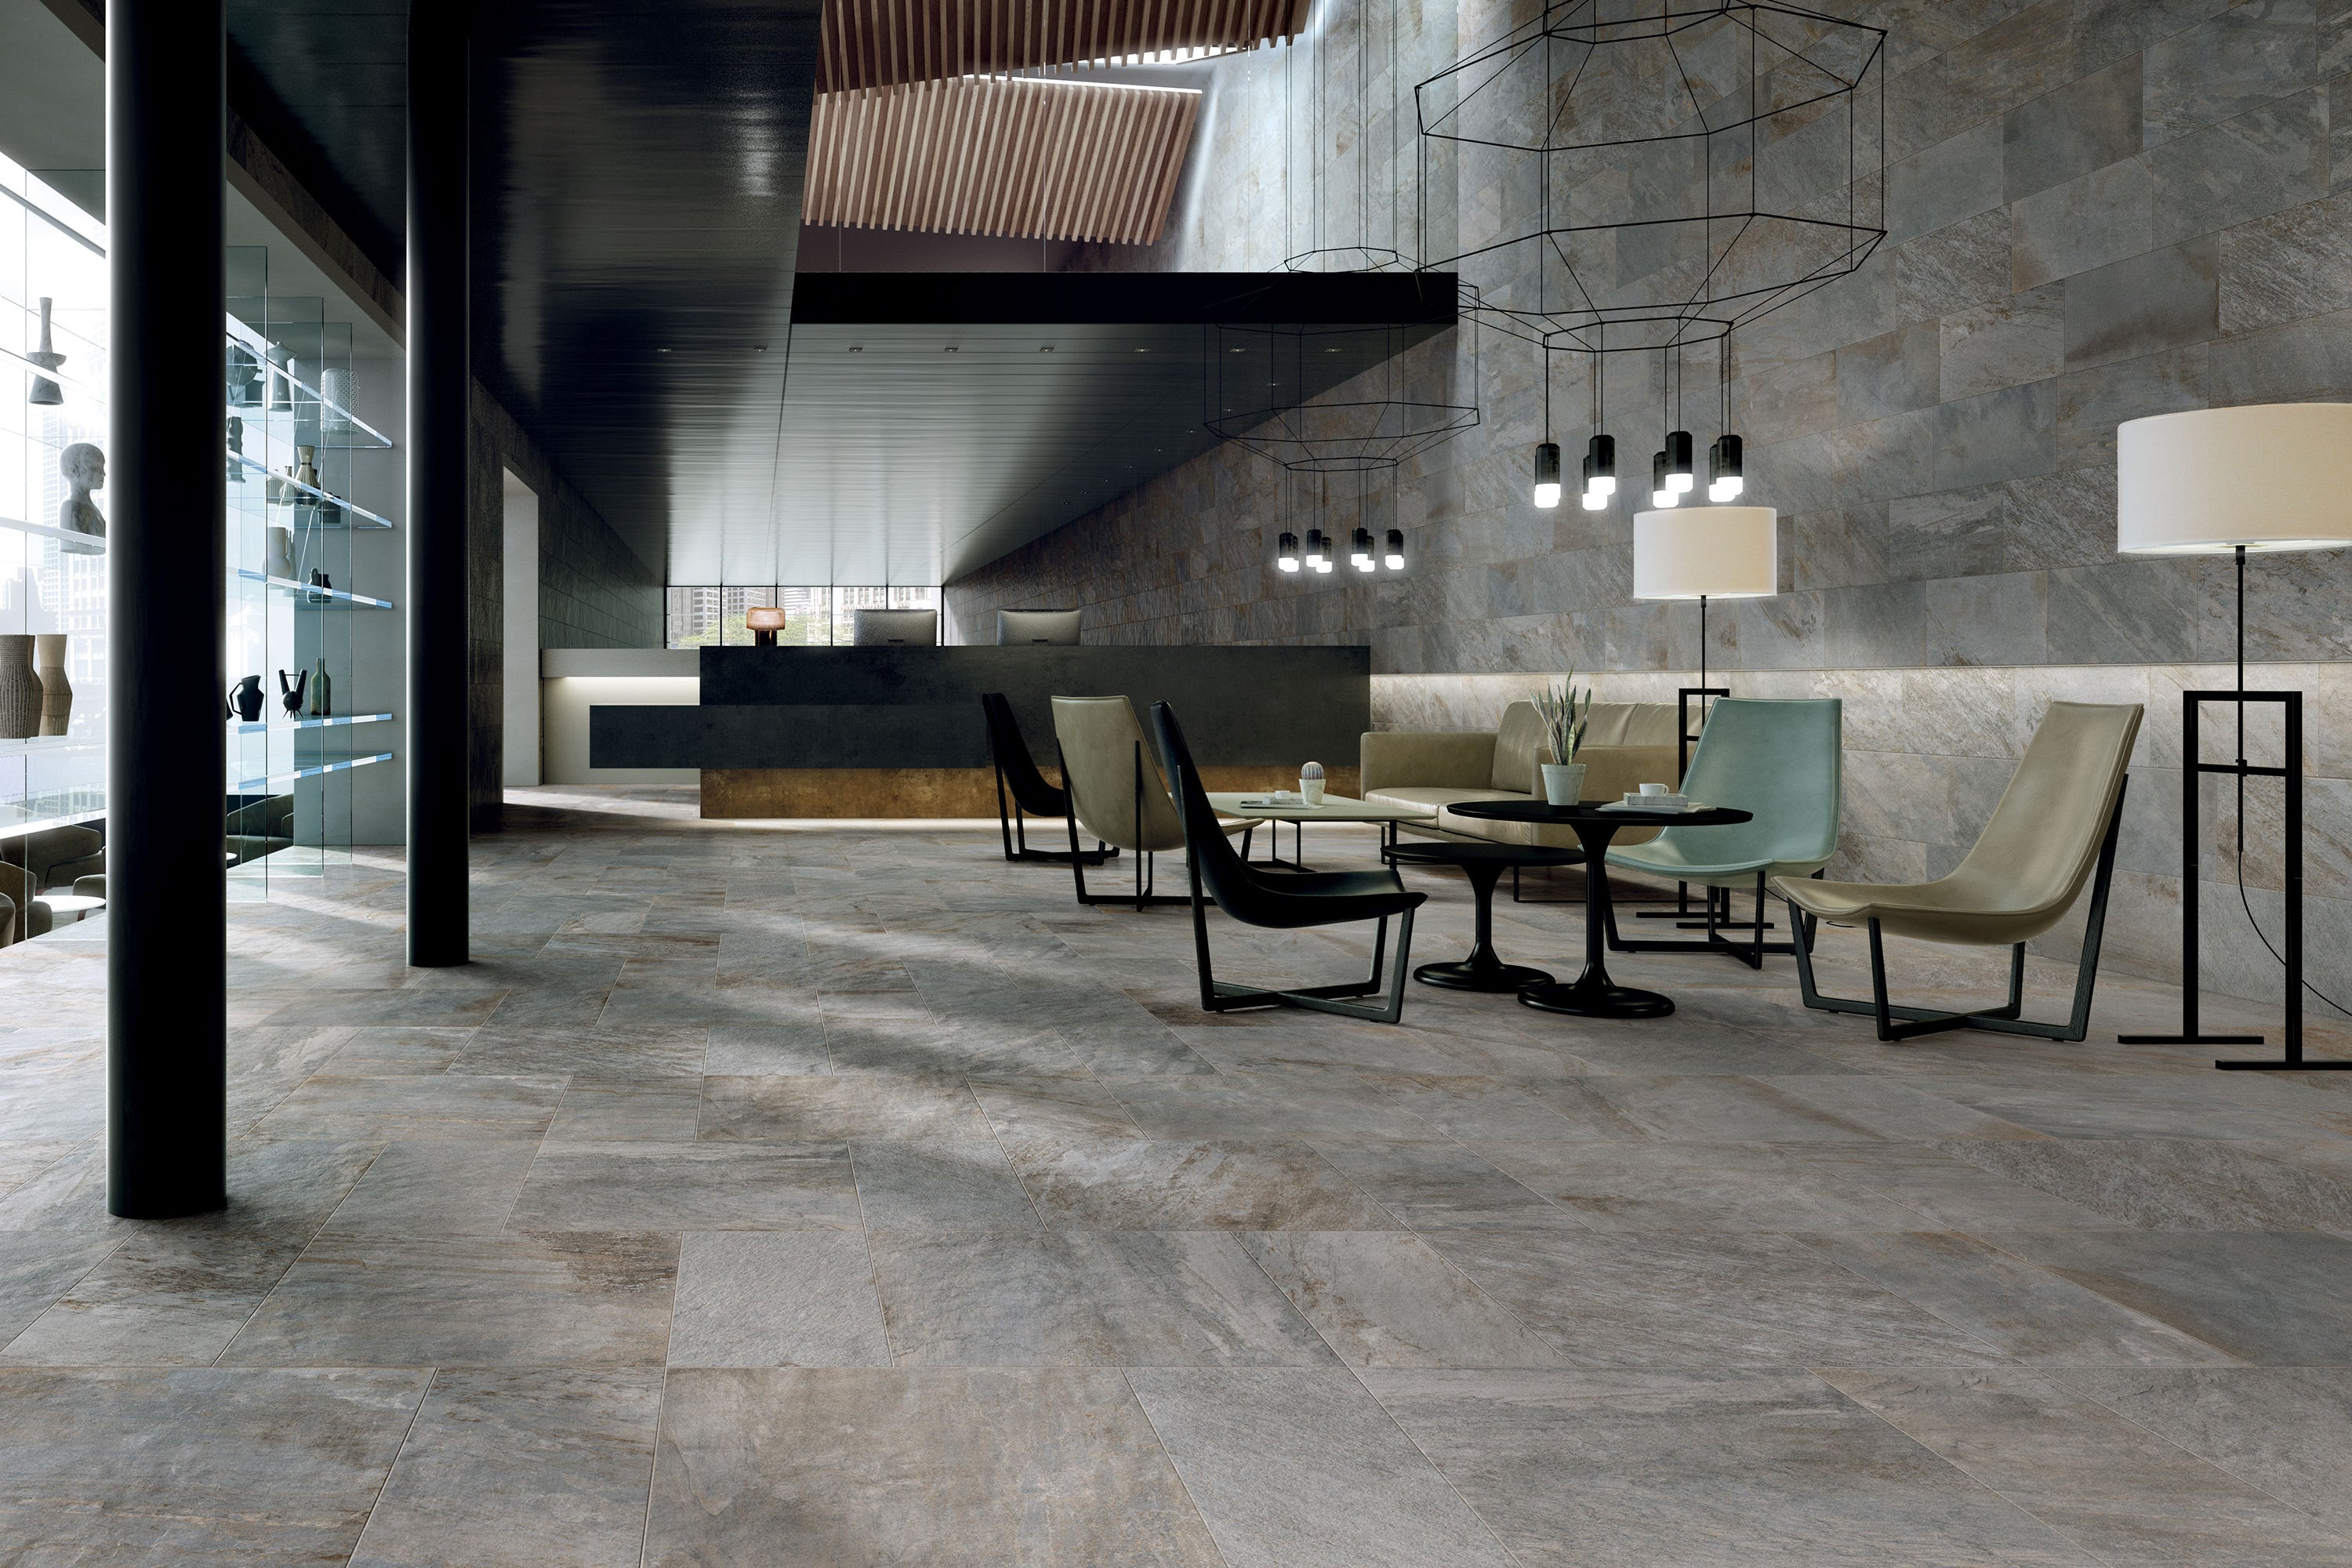 Porcelain tile collection from Surface Group featuring natural stone design in a modern living space setting.